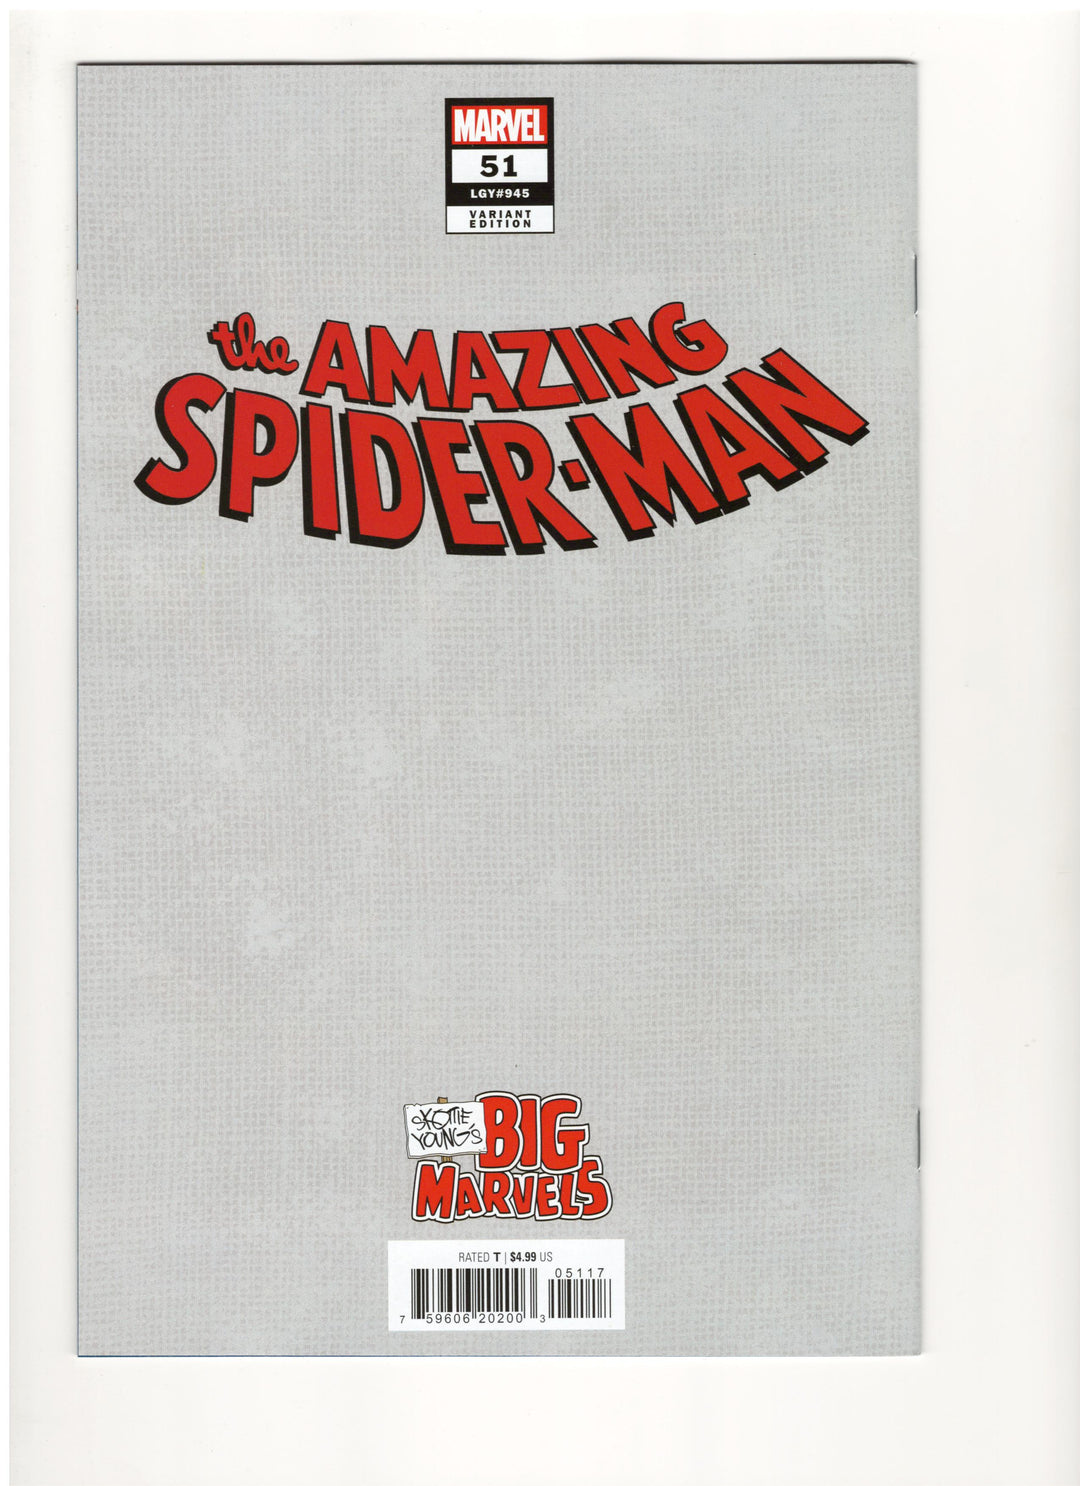 Amazing Spider-Man (2022) #51 Variant (1:50) Skottie Young's Big Marvel Virgin Black And White Edition